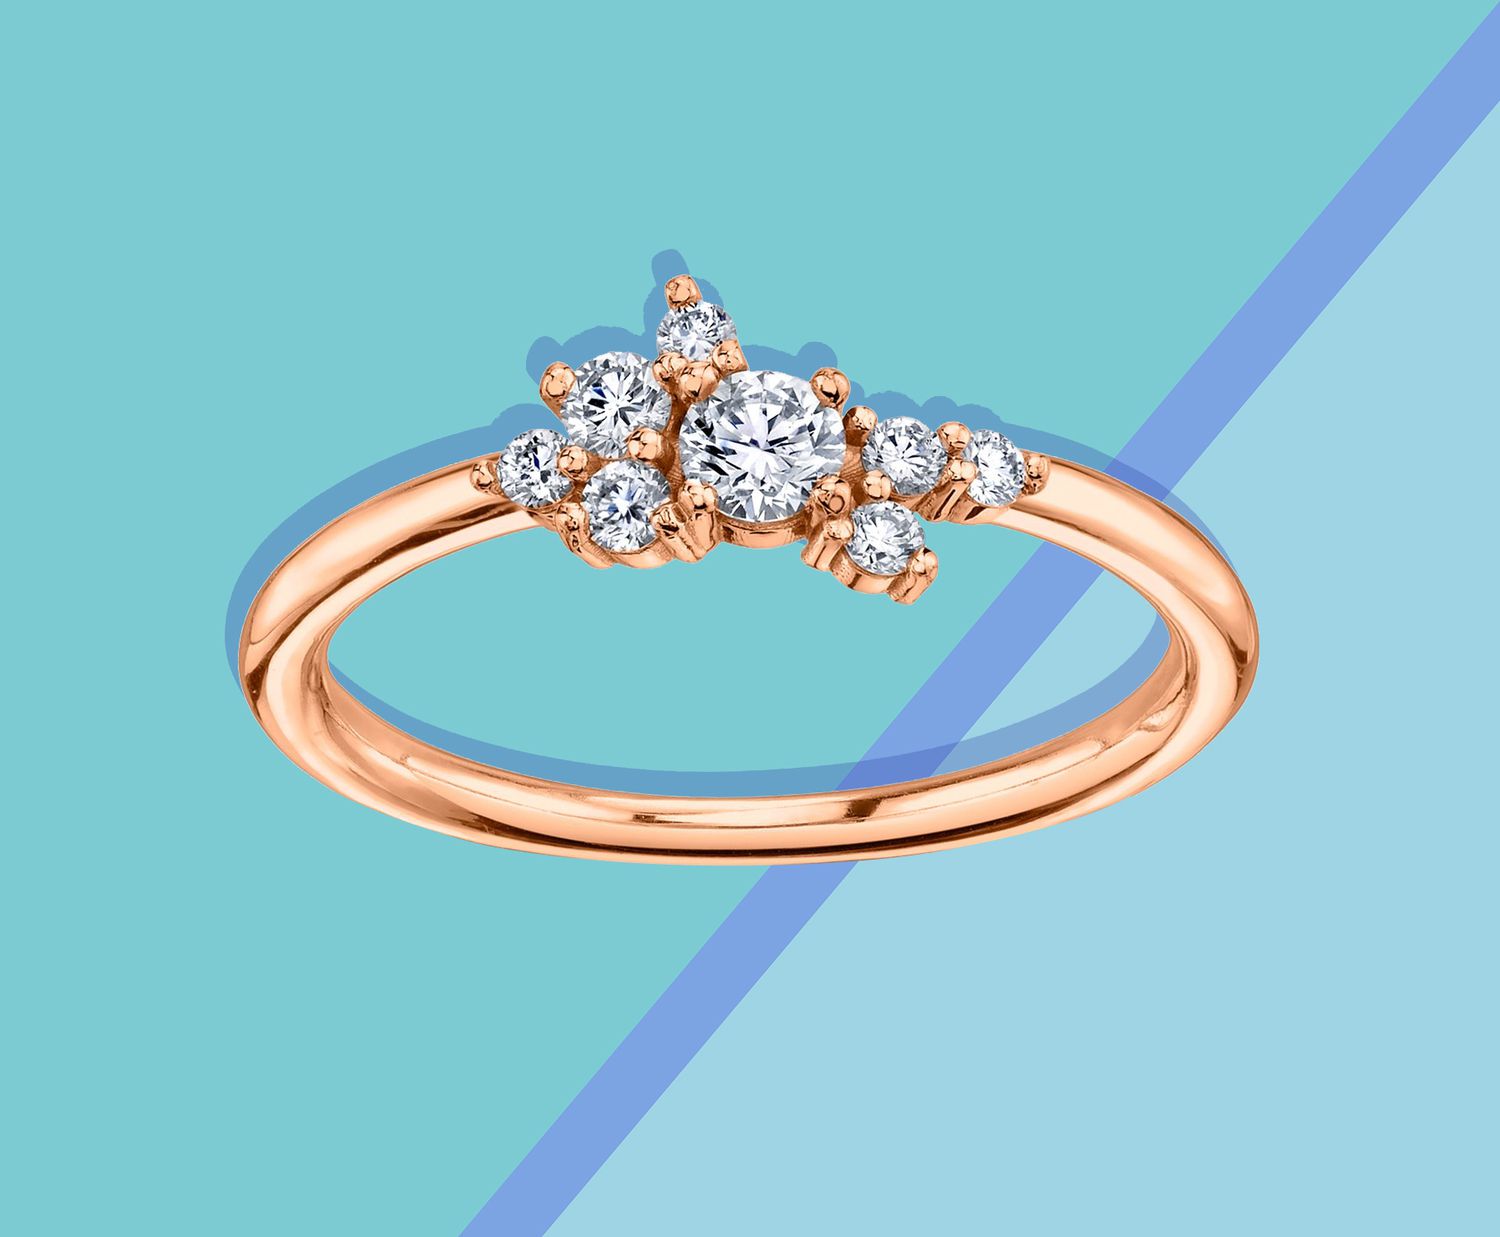 Right-hand duchess ring by White Flash